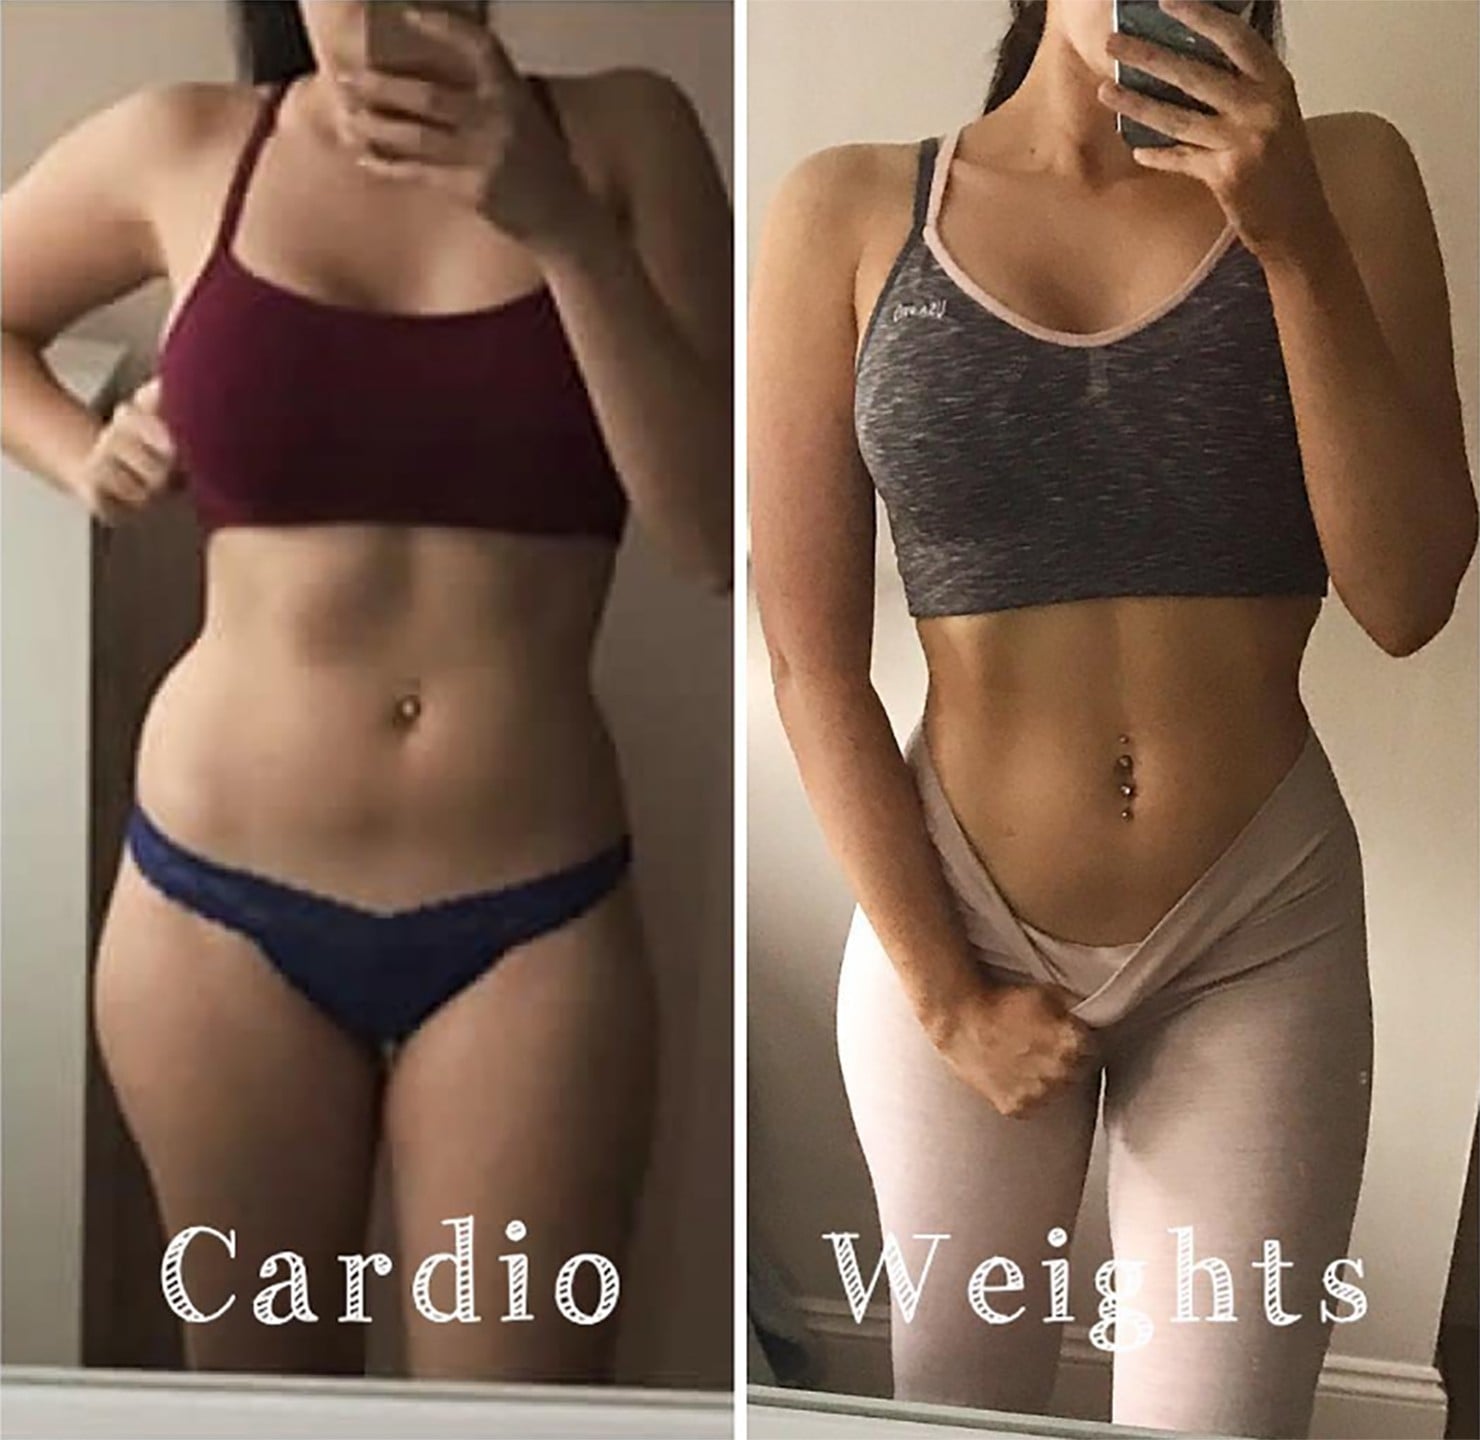 Cardio vs. Weights Weight-Loss Transformations